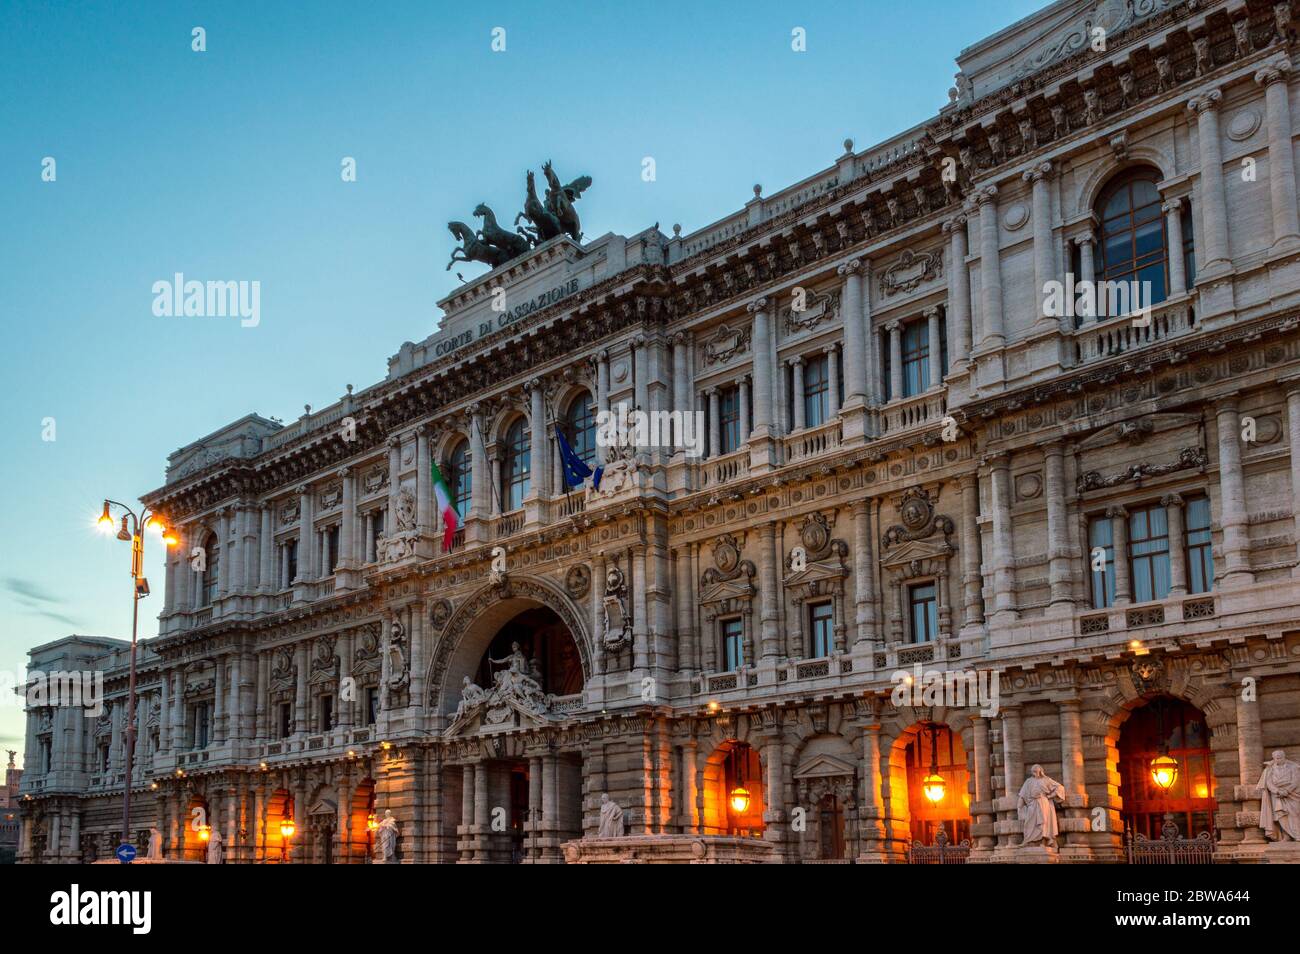 Rome / Italy - May 3, 2015: The Palace of Justice (Palazzo di Giustizia), the seat of the Supreme Court of Cassation and the Judicial Public Library i Stock Photo